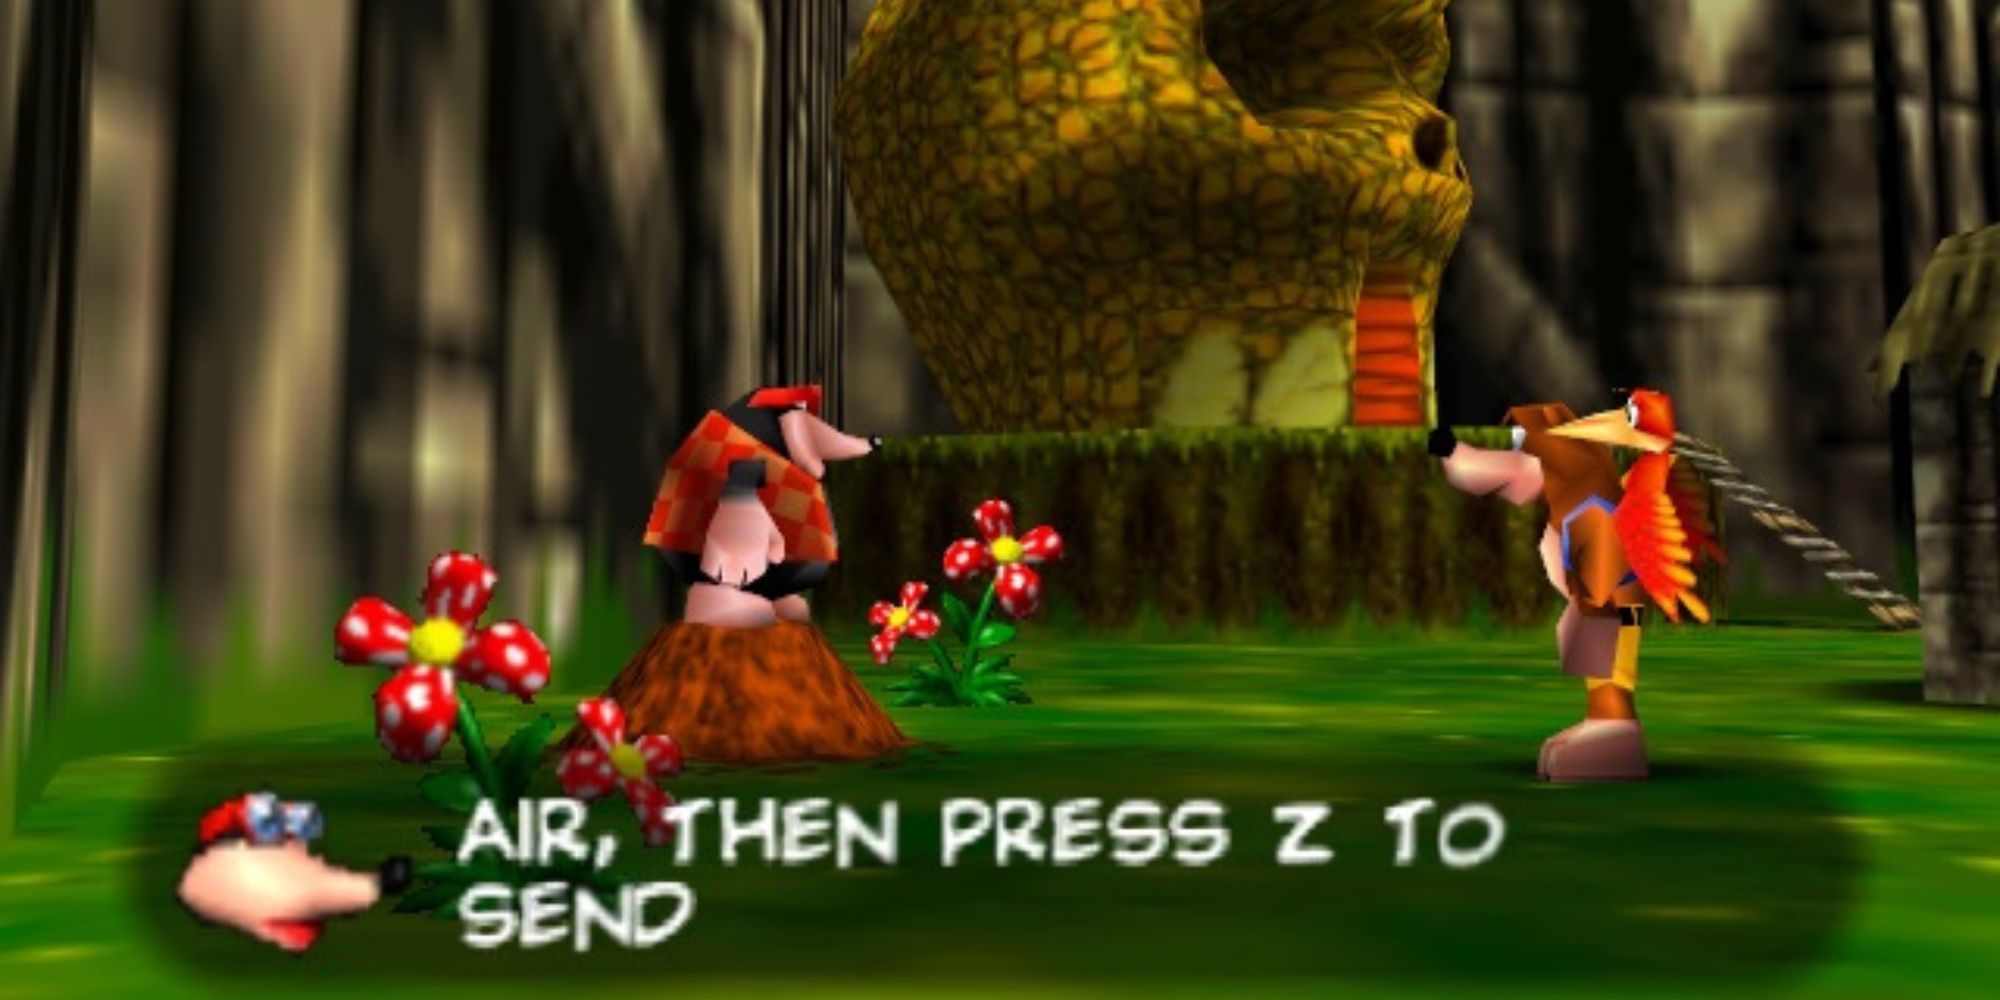 Banjo and Kazooie learning how to butt stomp